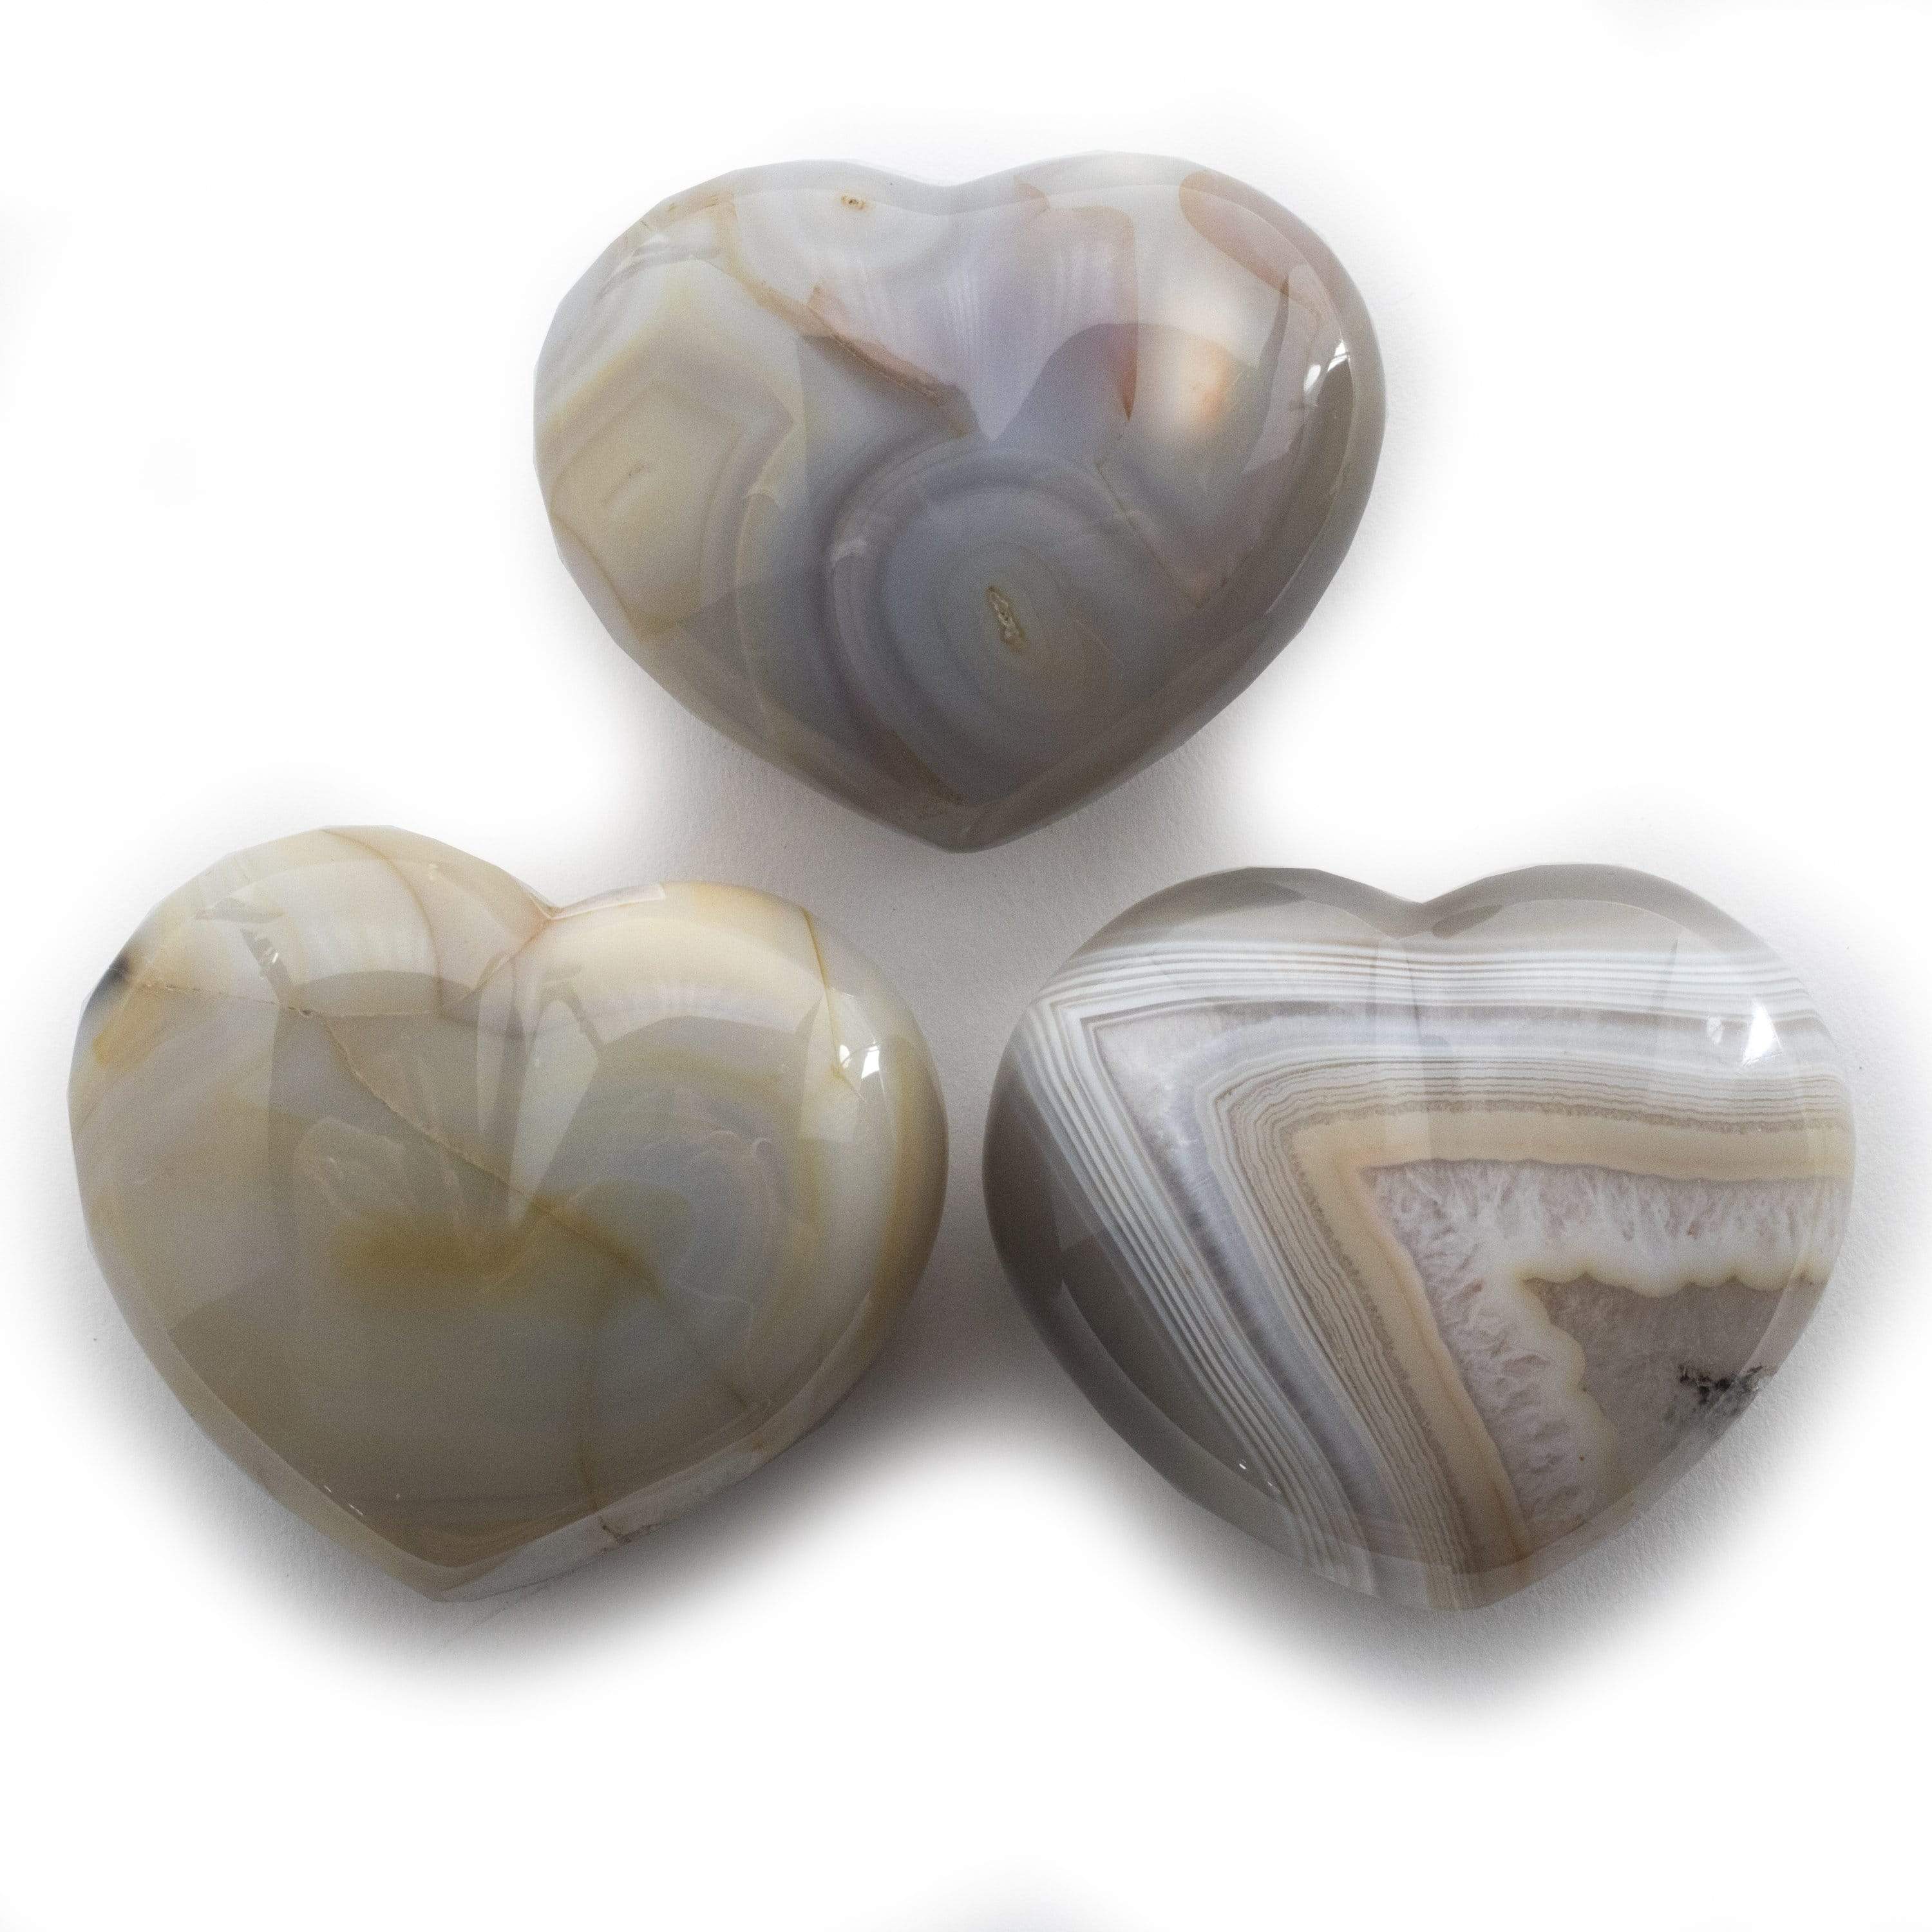 Kalifano Gemstone Carvings Agate Gemstone Heart Carving GC-HR-AGATE